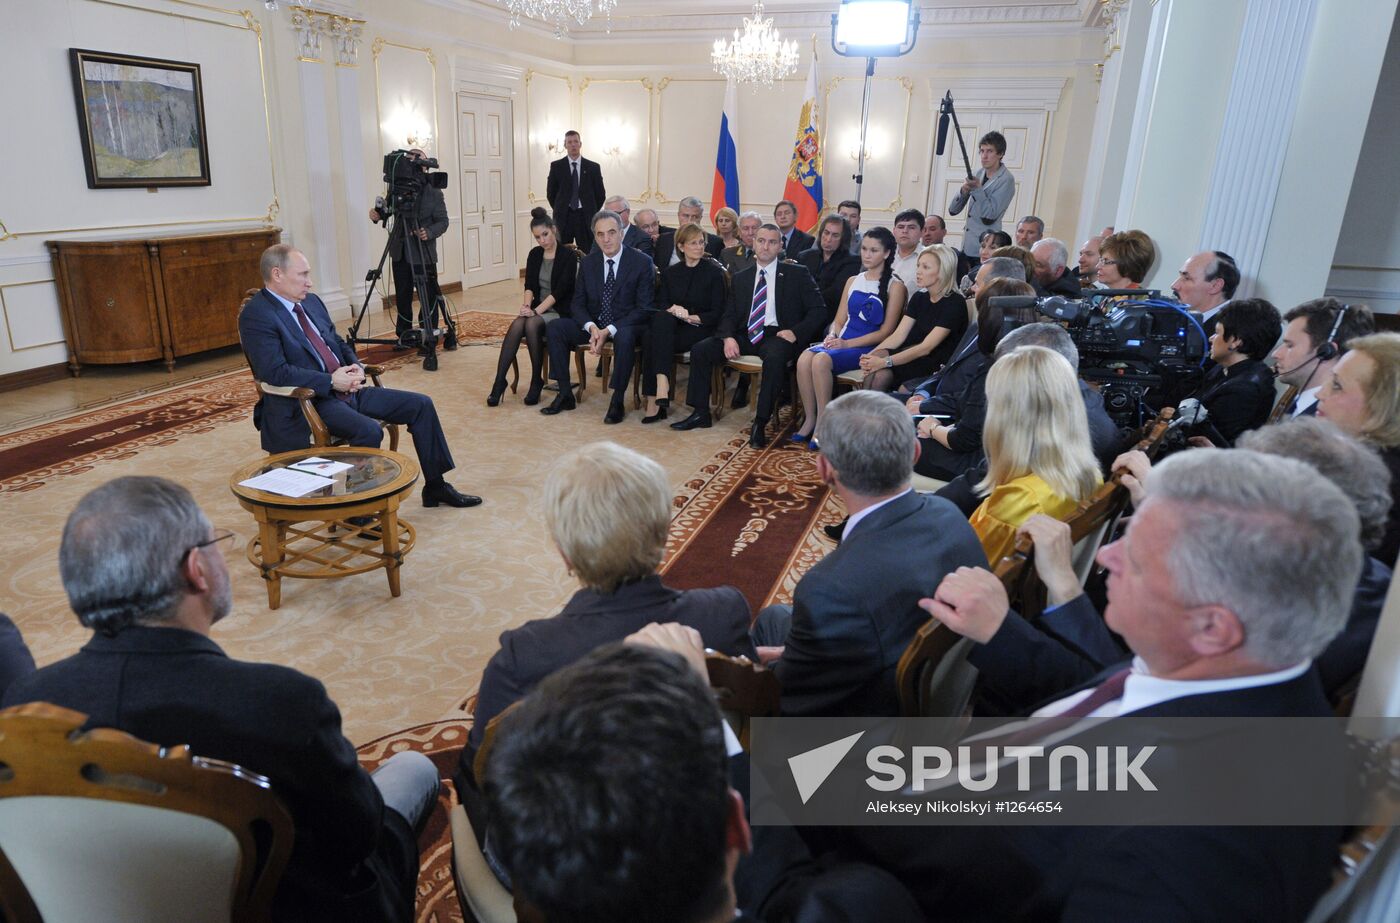 Vladimir Putin meets with All-Russia People's Front leaders